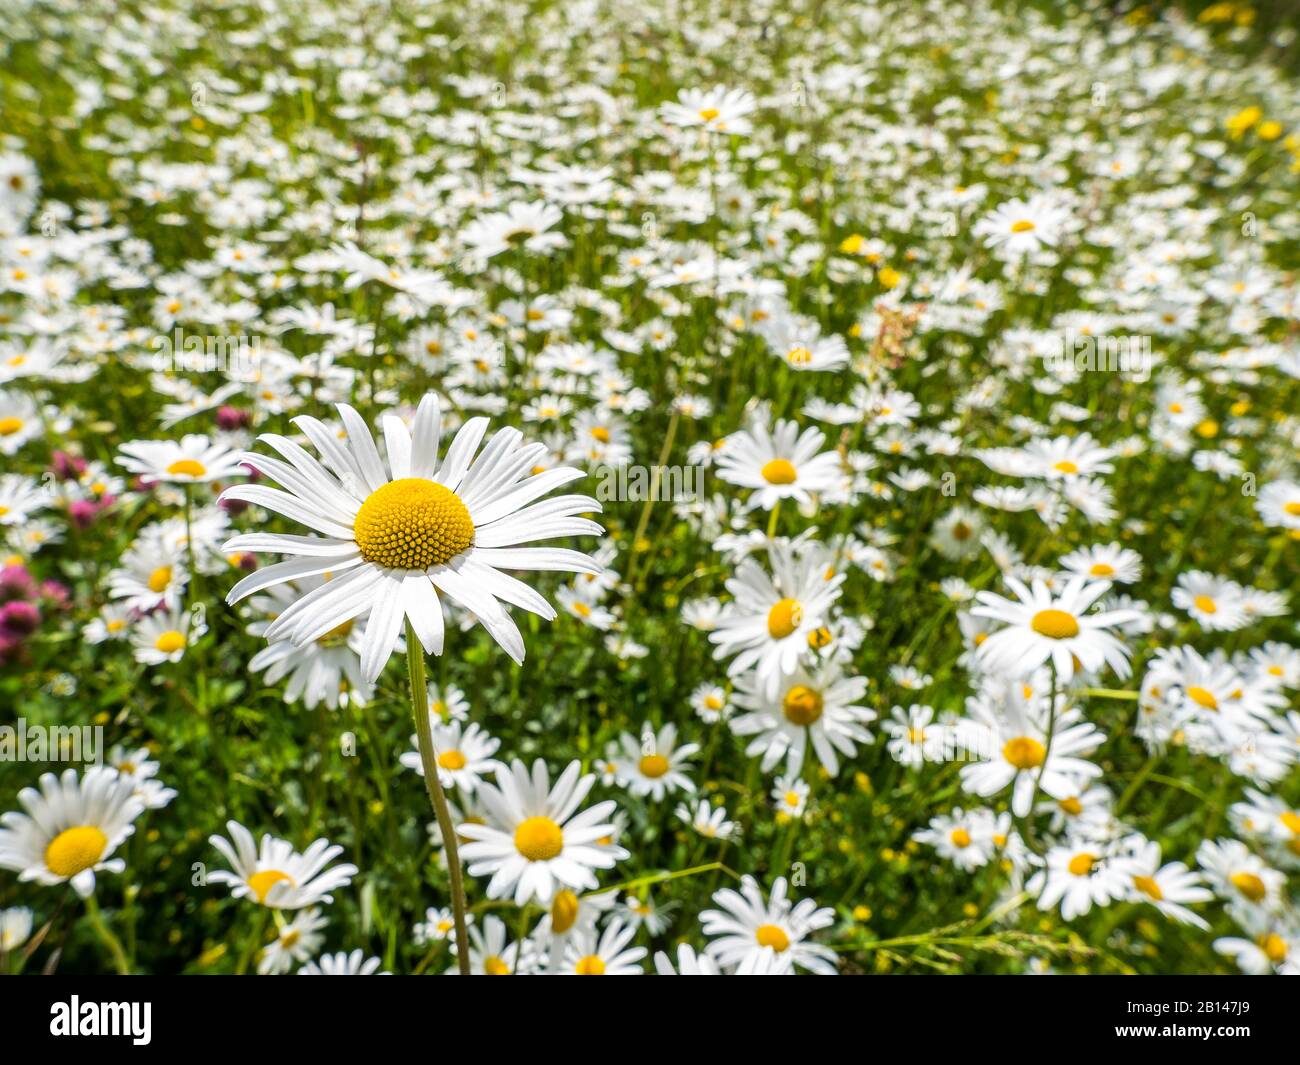 Flower meadow, daisies Stock Photo